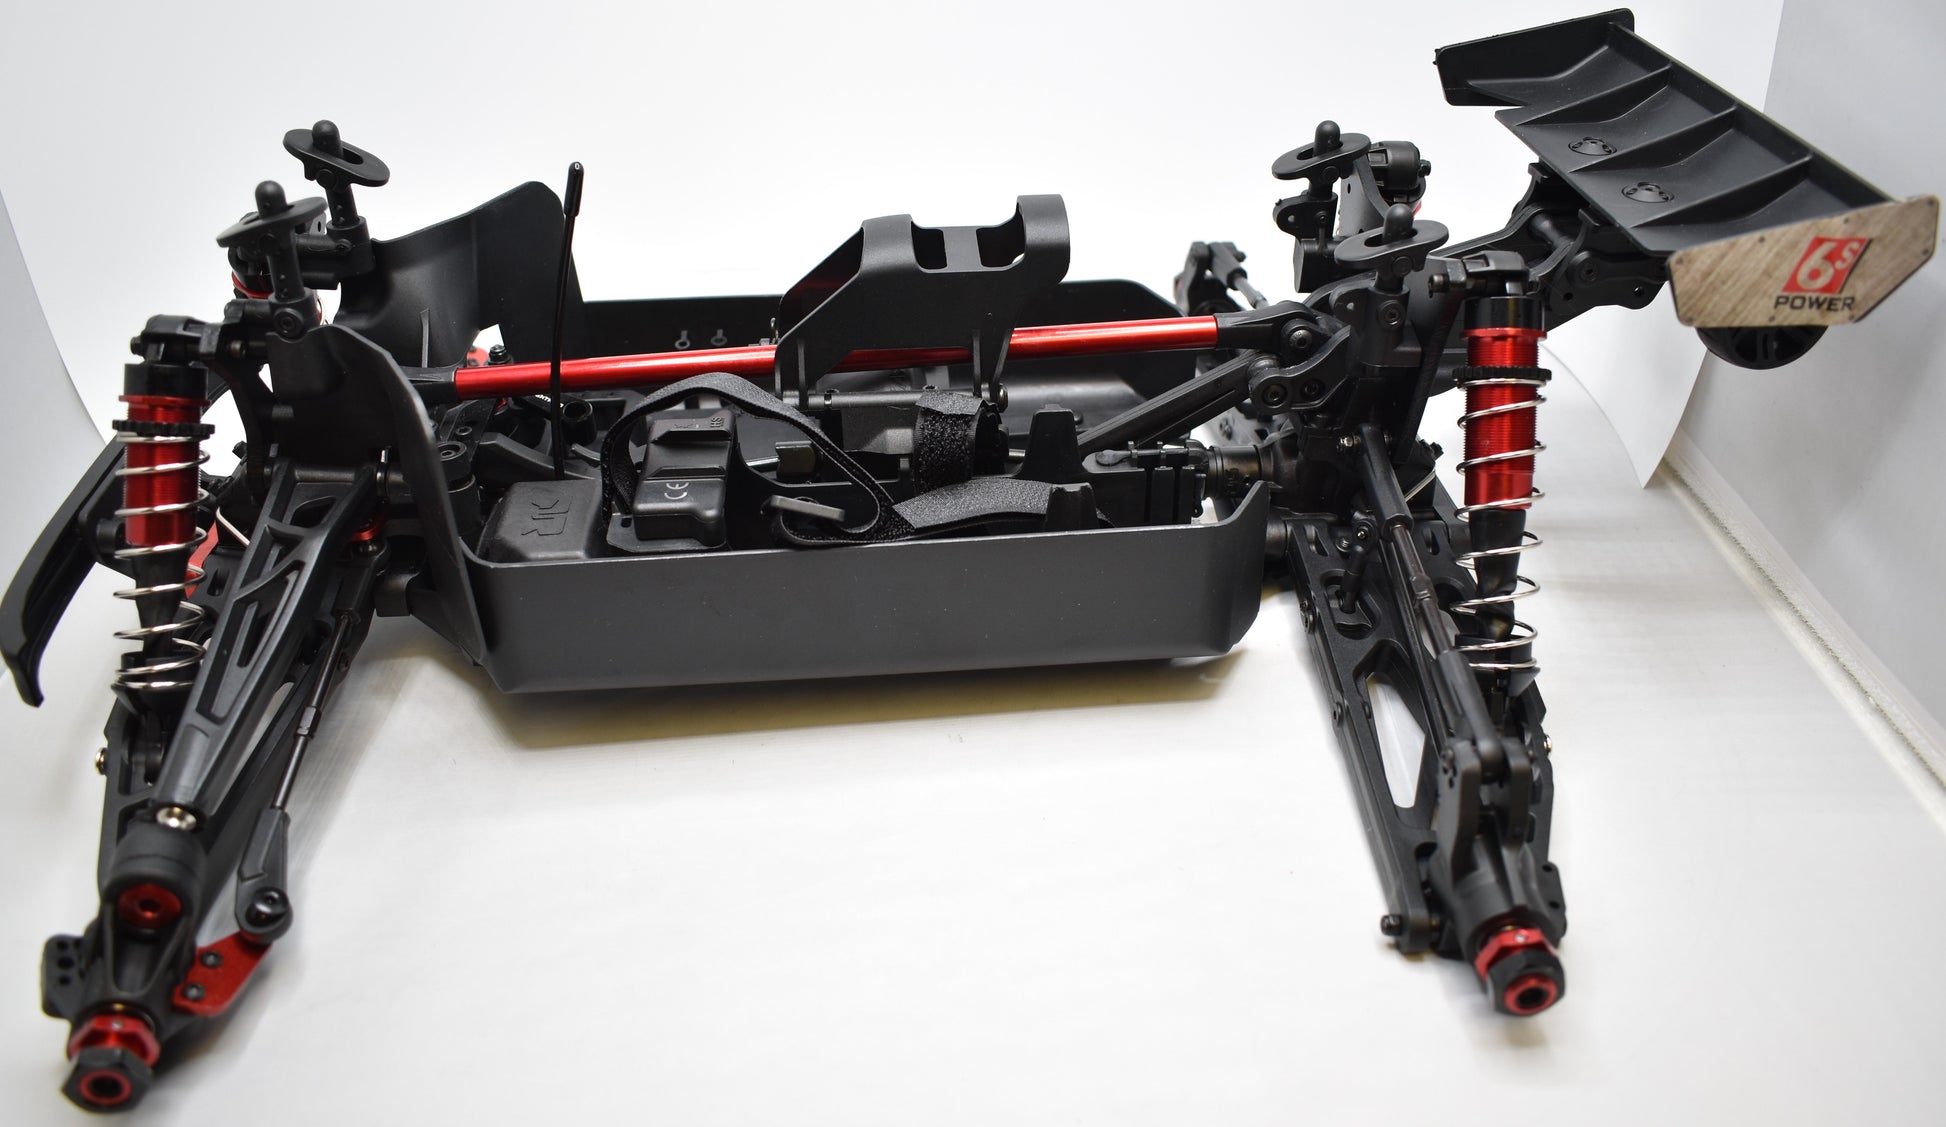 Arrma 1/8 NOTORIOUS 6S 4WD BLX Stunt Truck Roller Slider Chassis - Dirt Cheap RC SAVING YOU MONEY, ONE PART AT A TIME